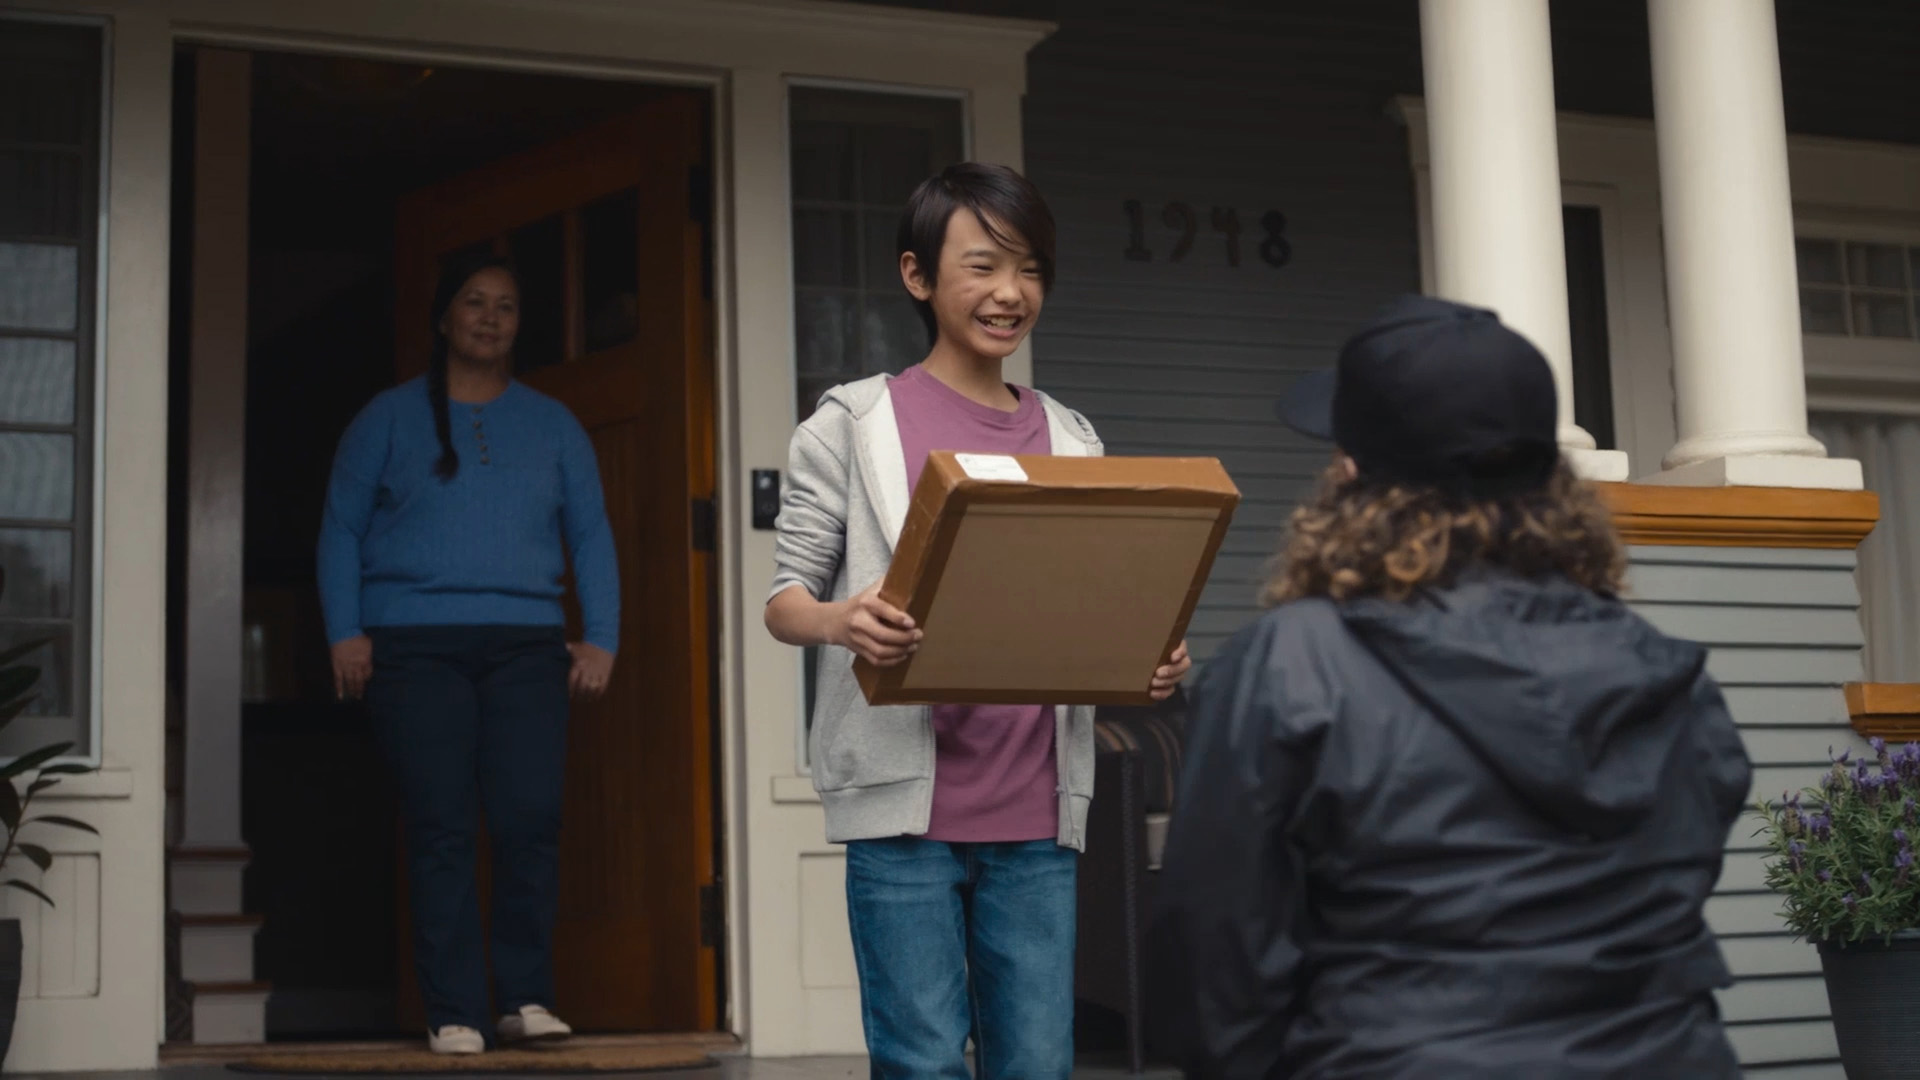 Photo of person receiving package delivery